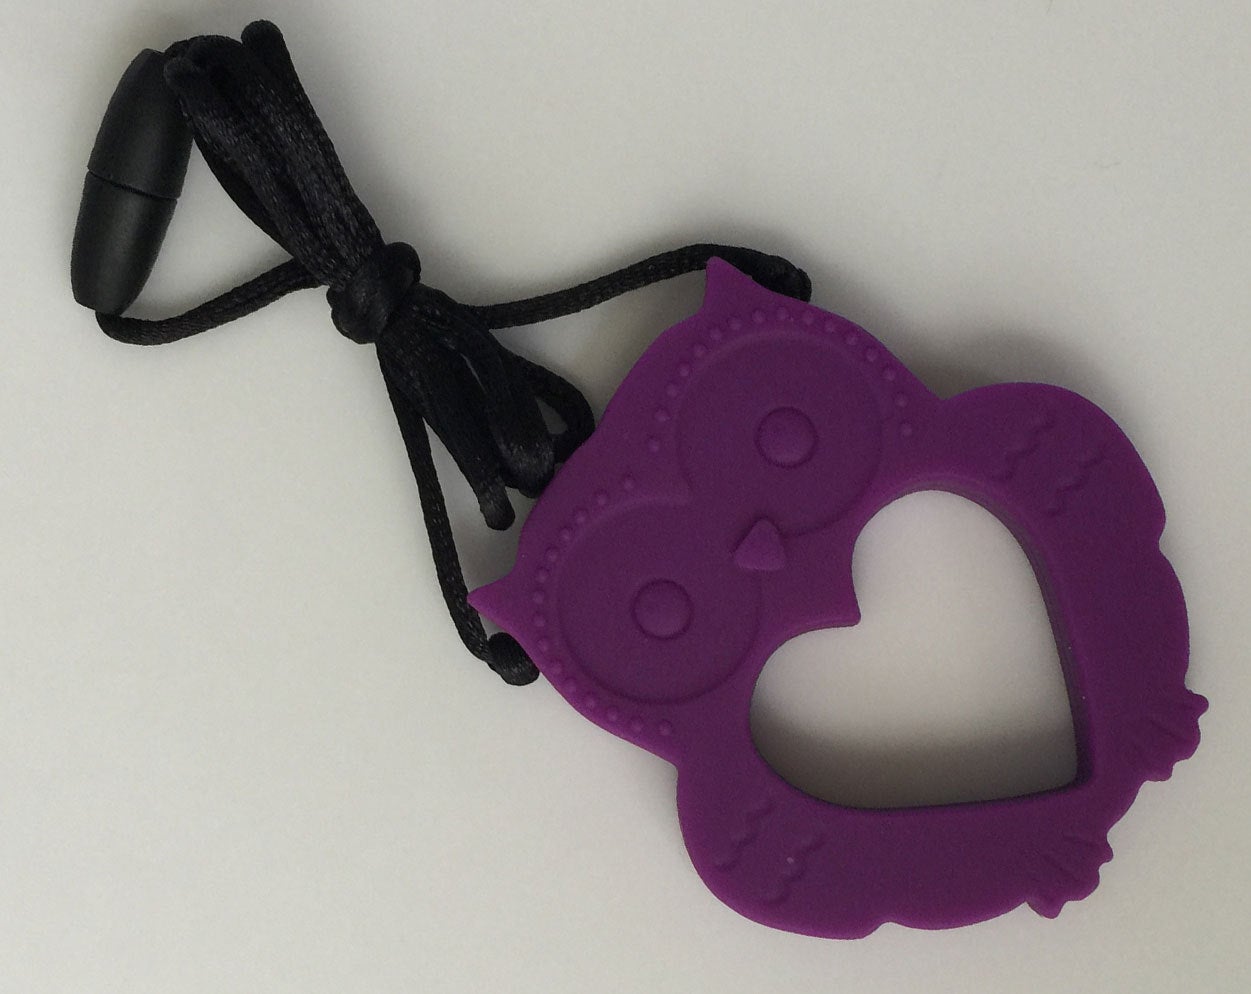 1 Silicone Owl Teether / Pendant in Plum - Silicone Teething, Silicone Teether, Teething Pendant